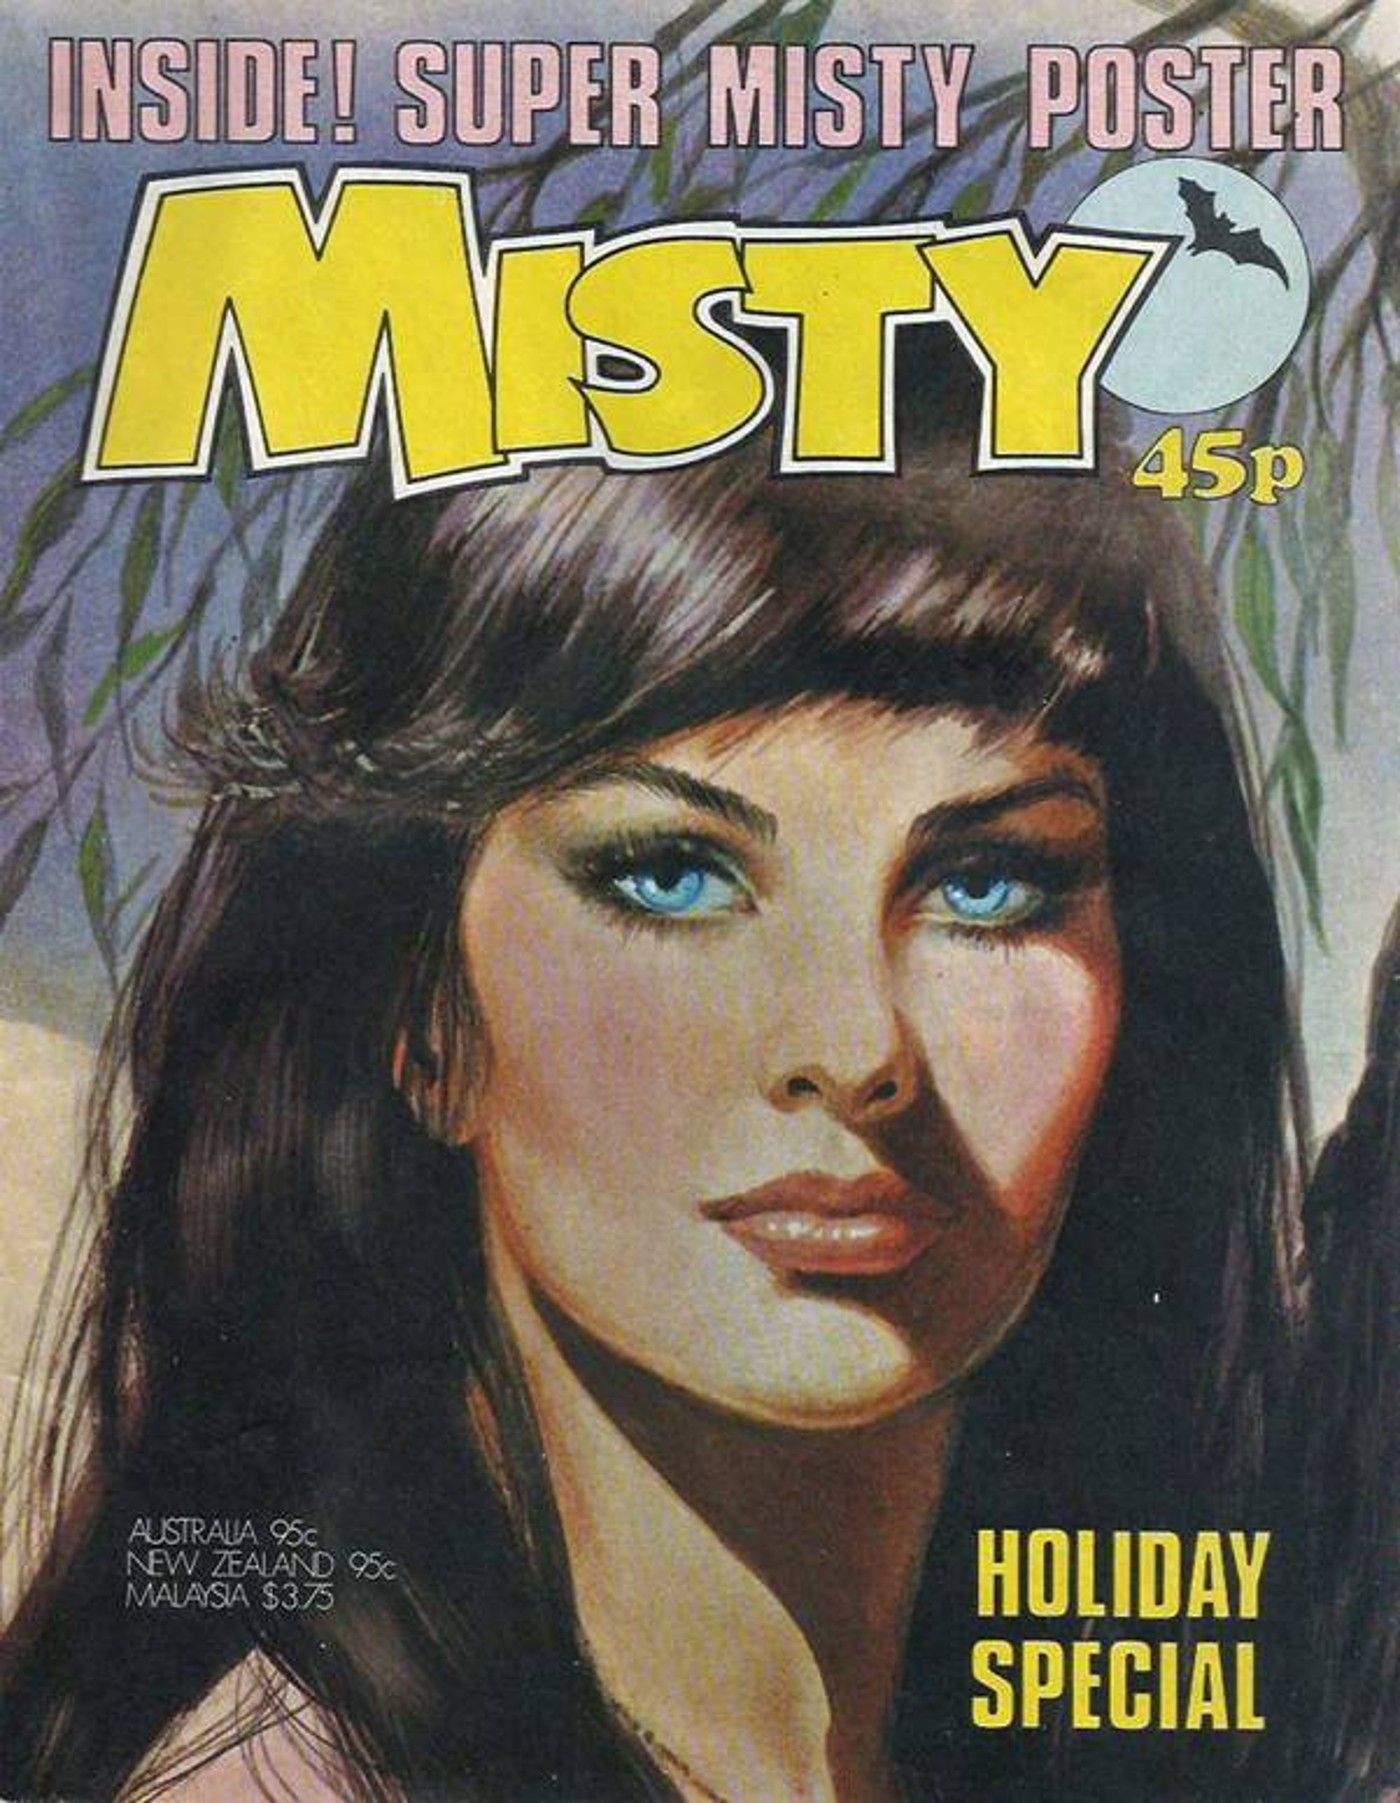 Cover of a Misty horror comic from Britain